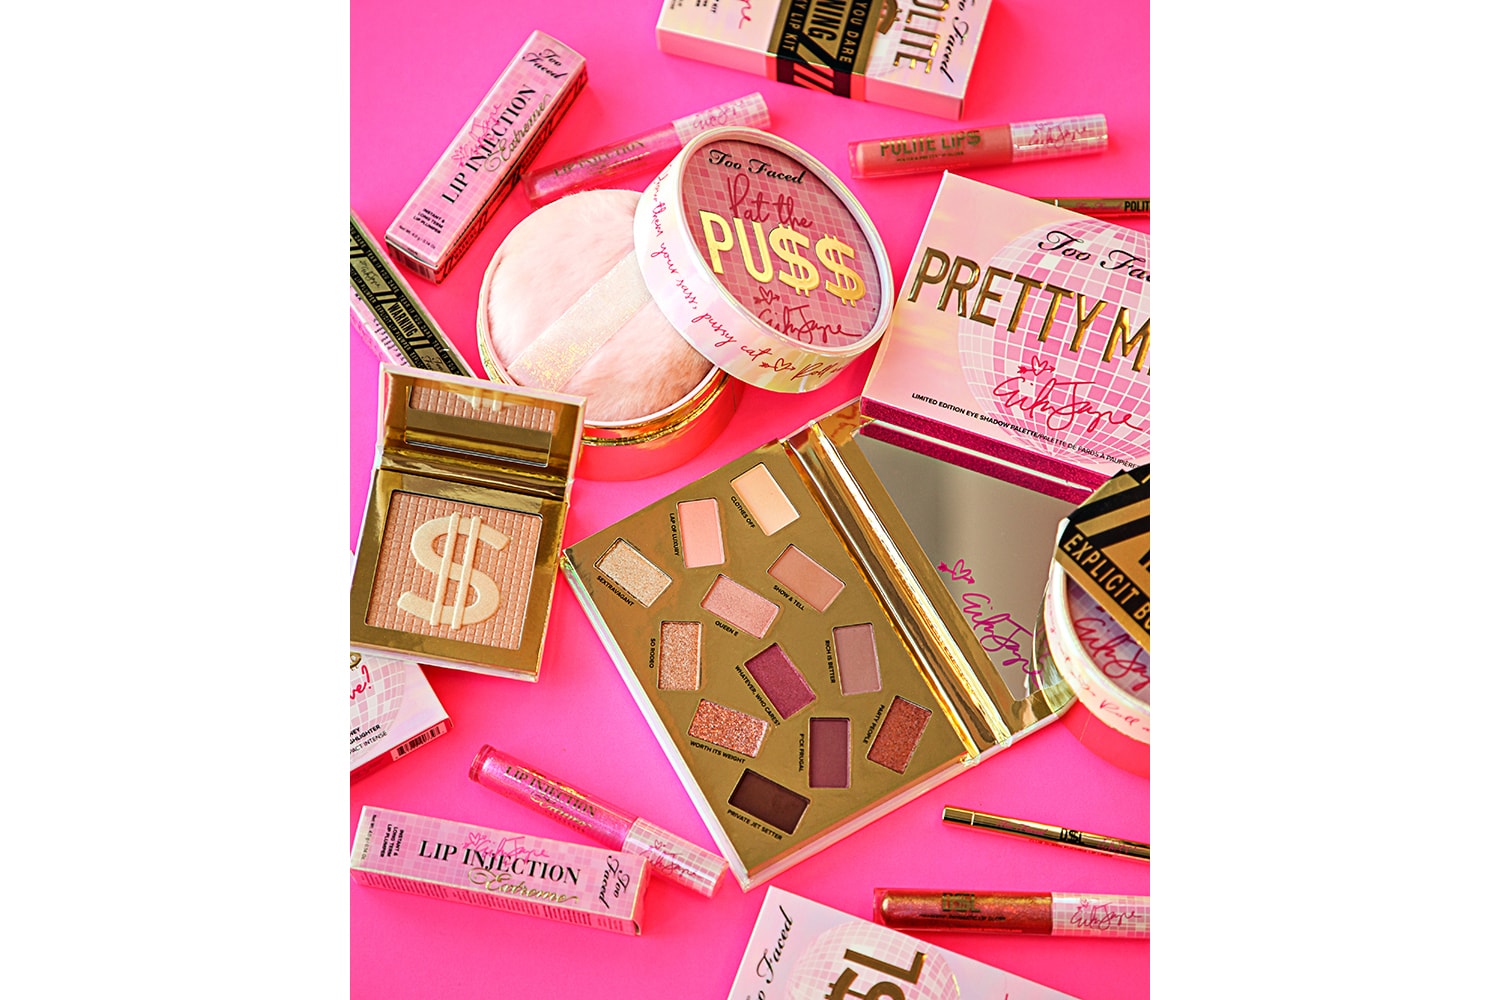 Too Faced "Pretty Mess" Makeup Collection Erika Jayne Real Housewives of Beverly Hills Beauty Range Cosmetics Lip Plumper Lip Injection Eyeshadow Palette Release